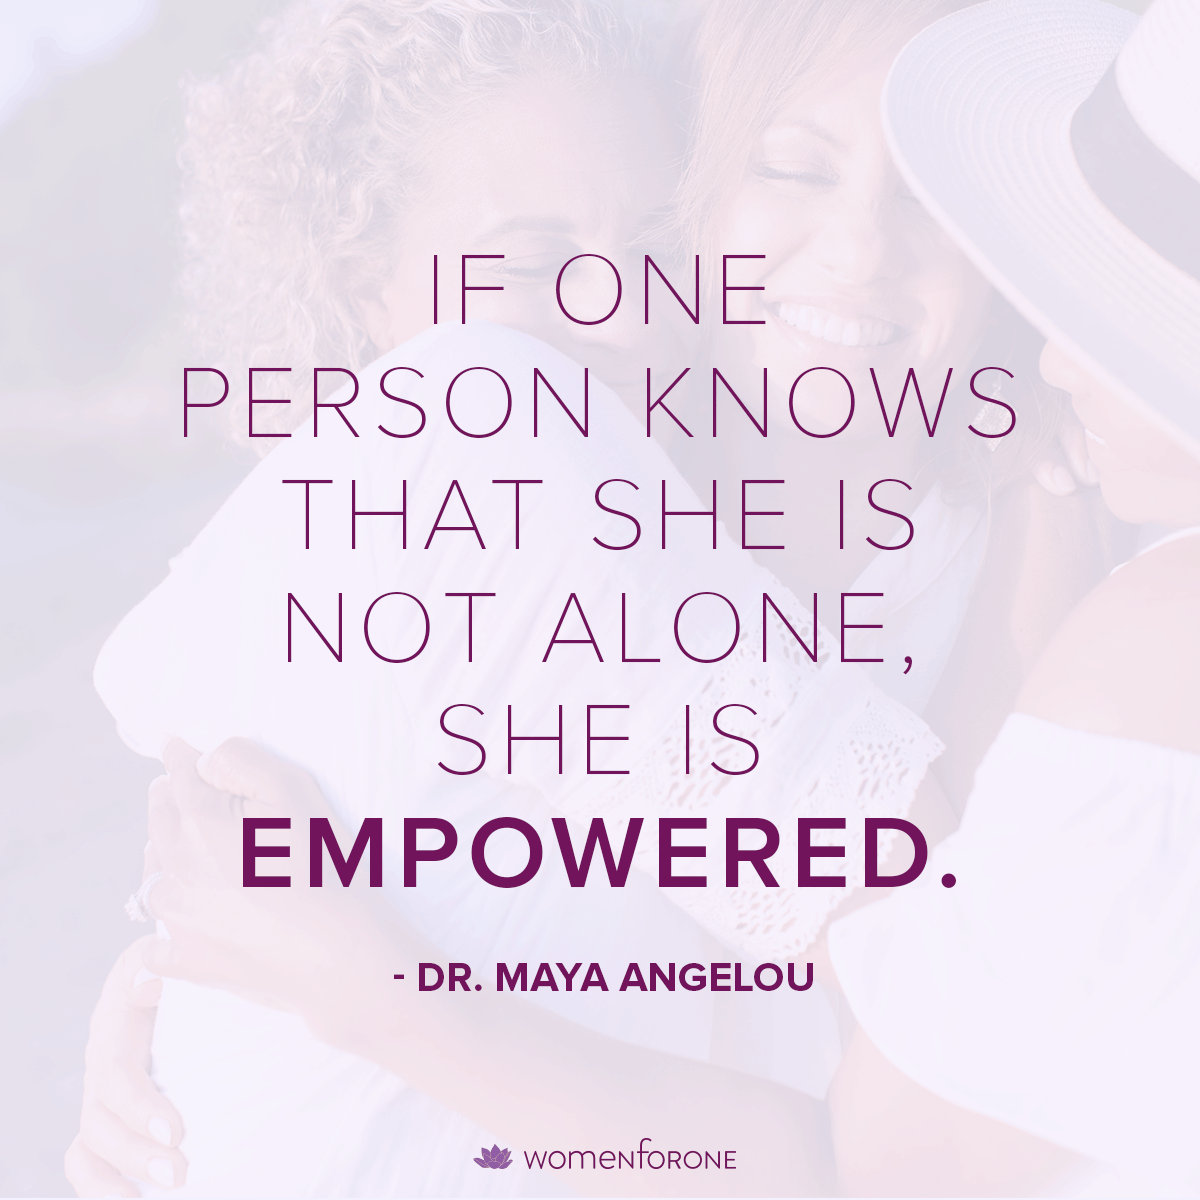 If one person knows that she is not alone, she is empowered.